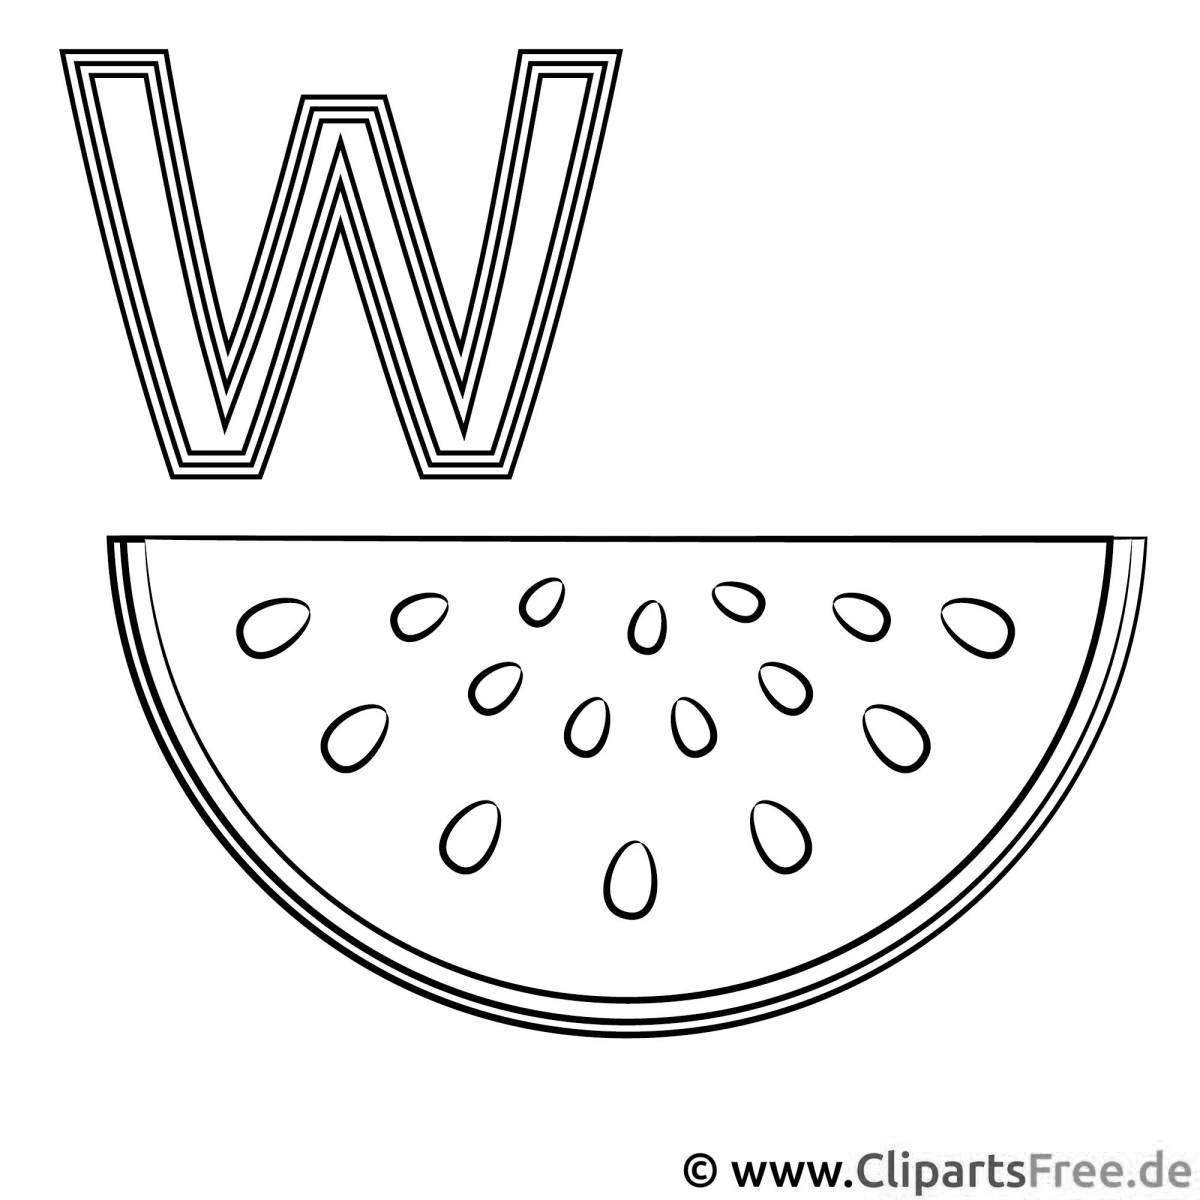 Glowing watermelon coloring page